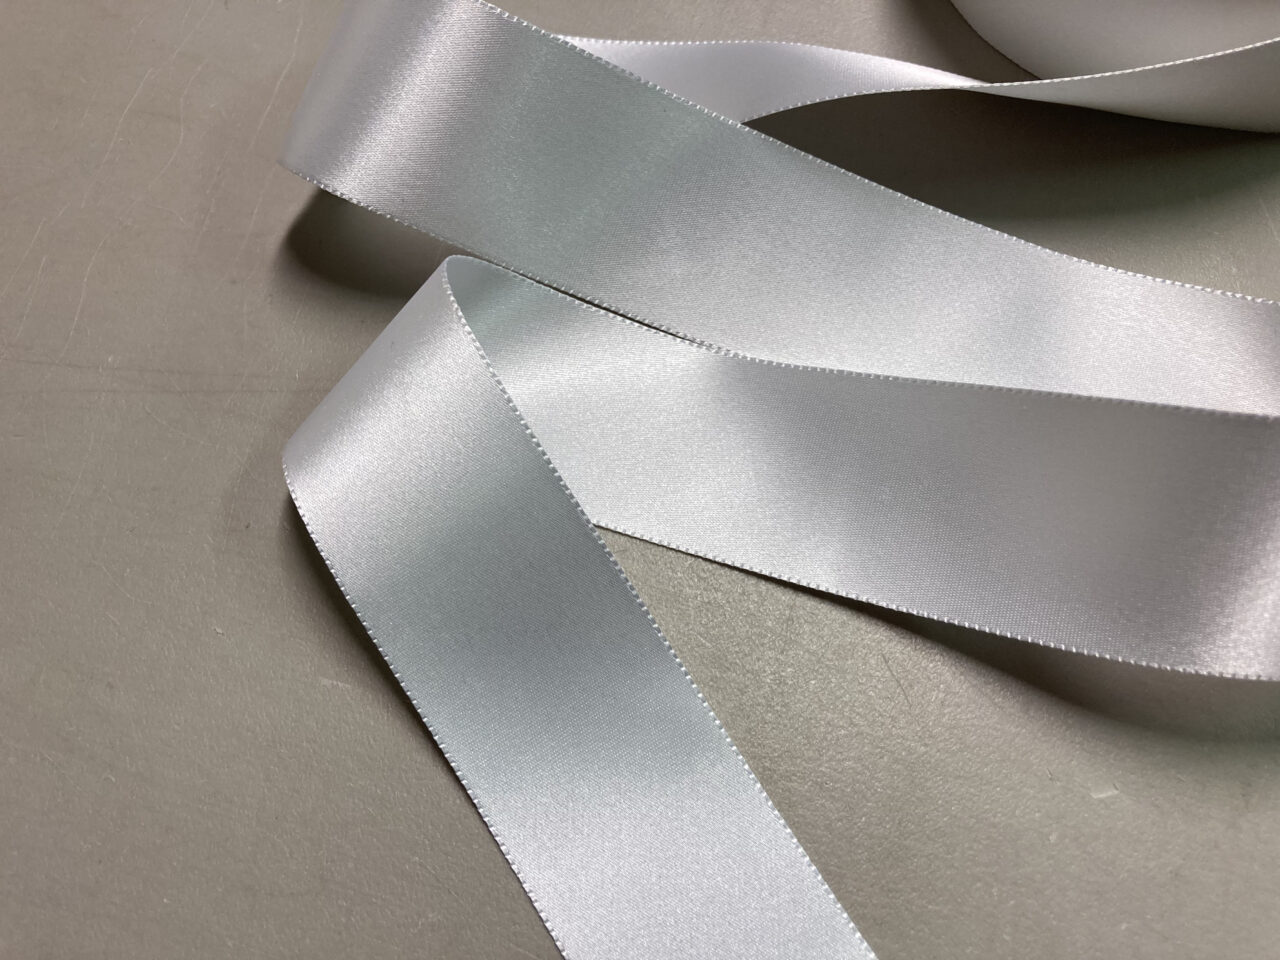 Double Faced Satin Ribbon 3/8 inch wide